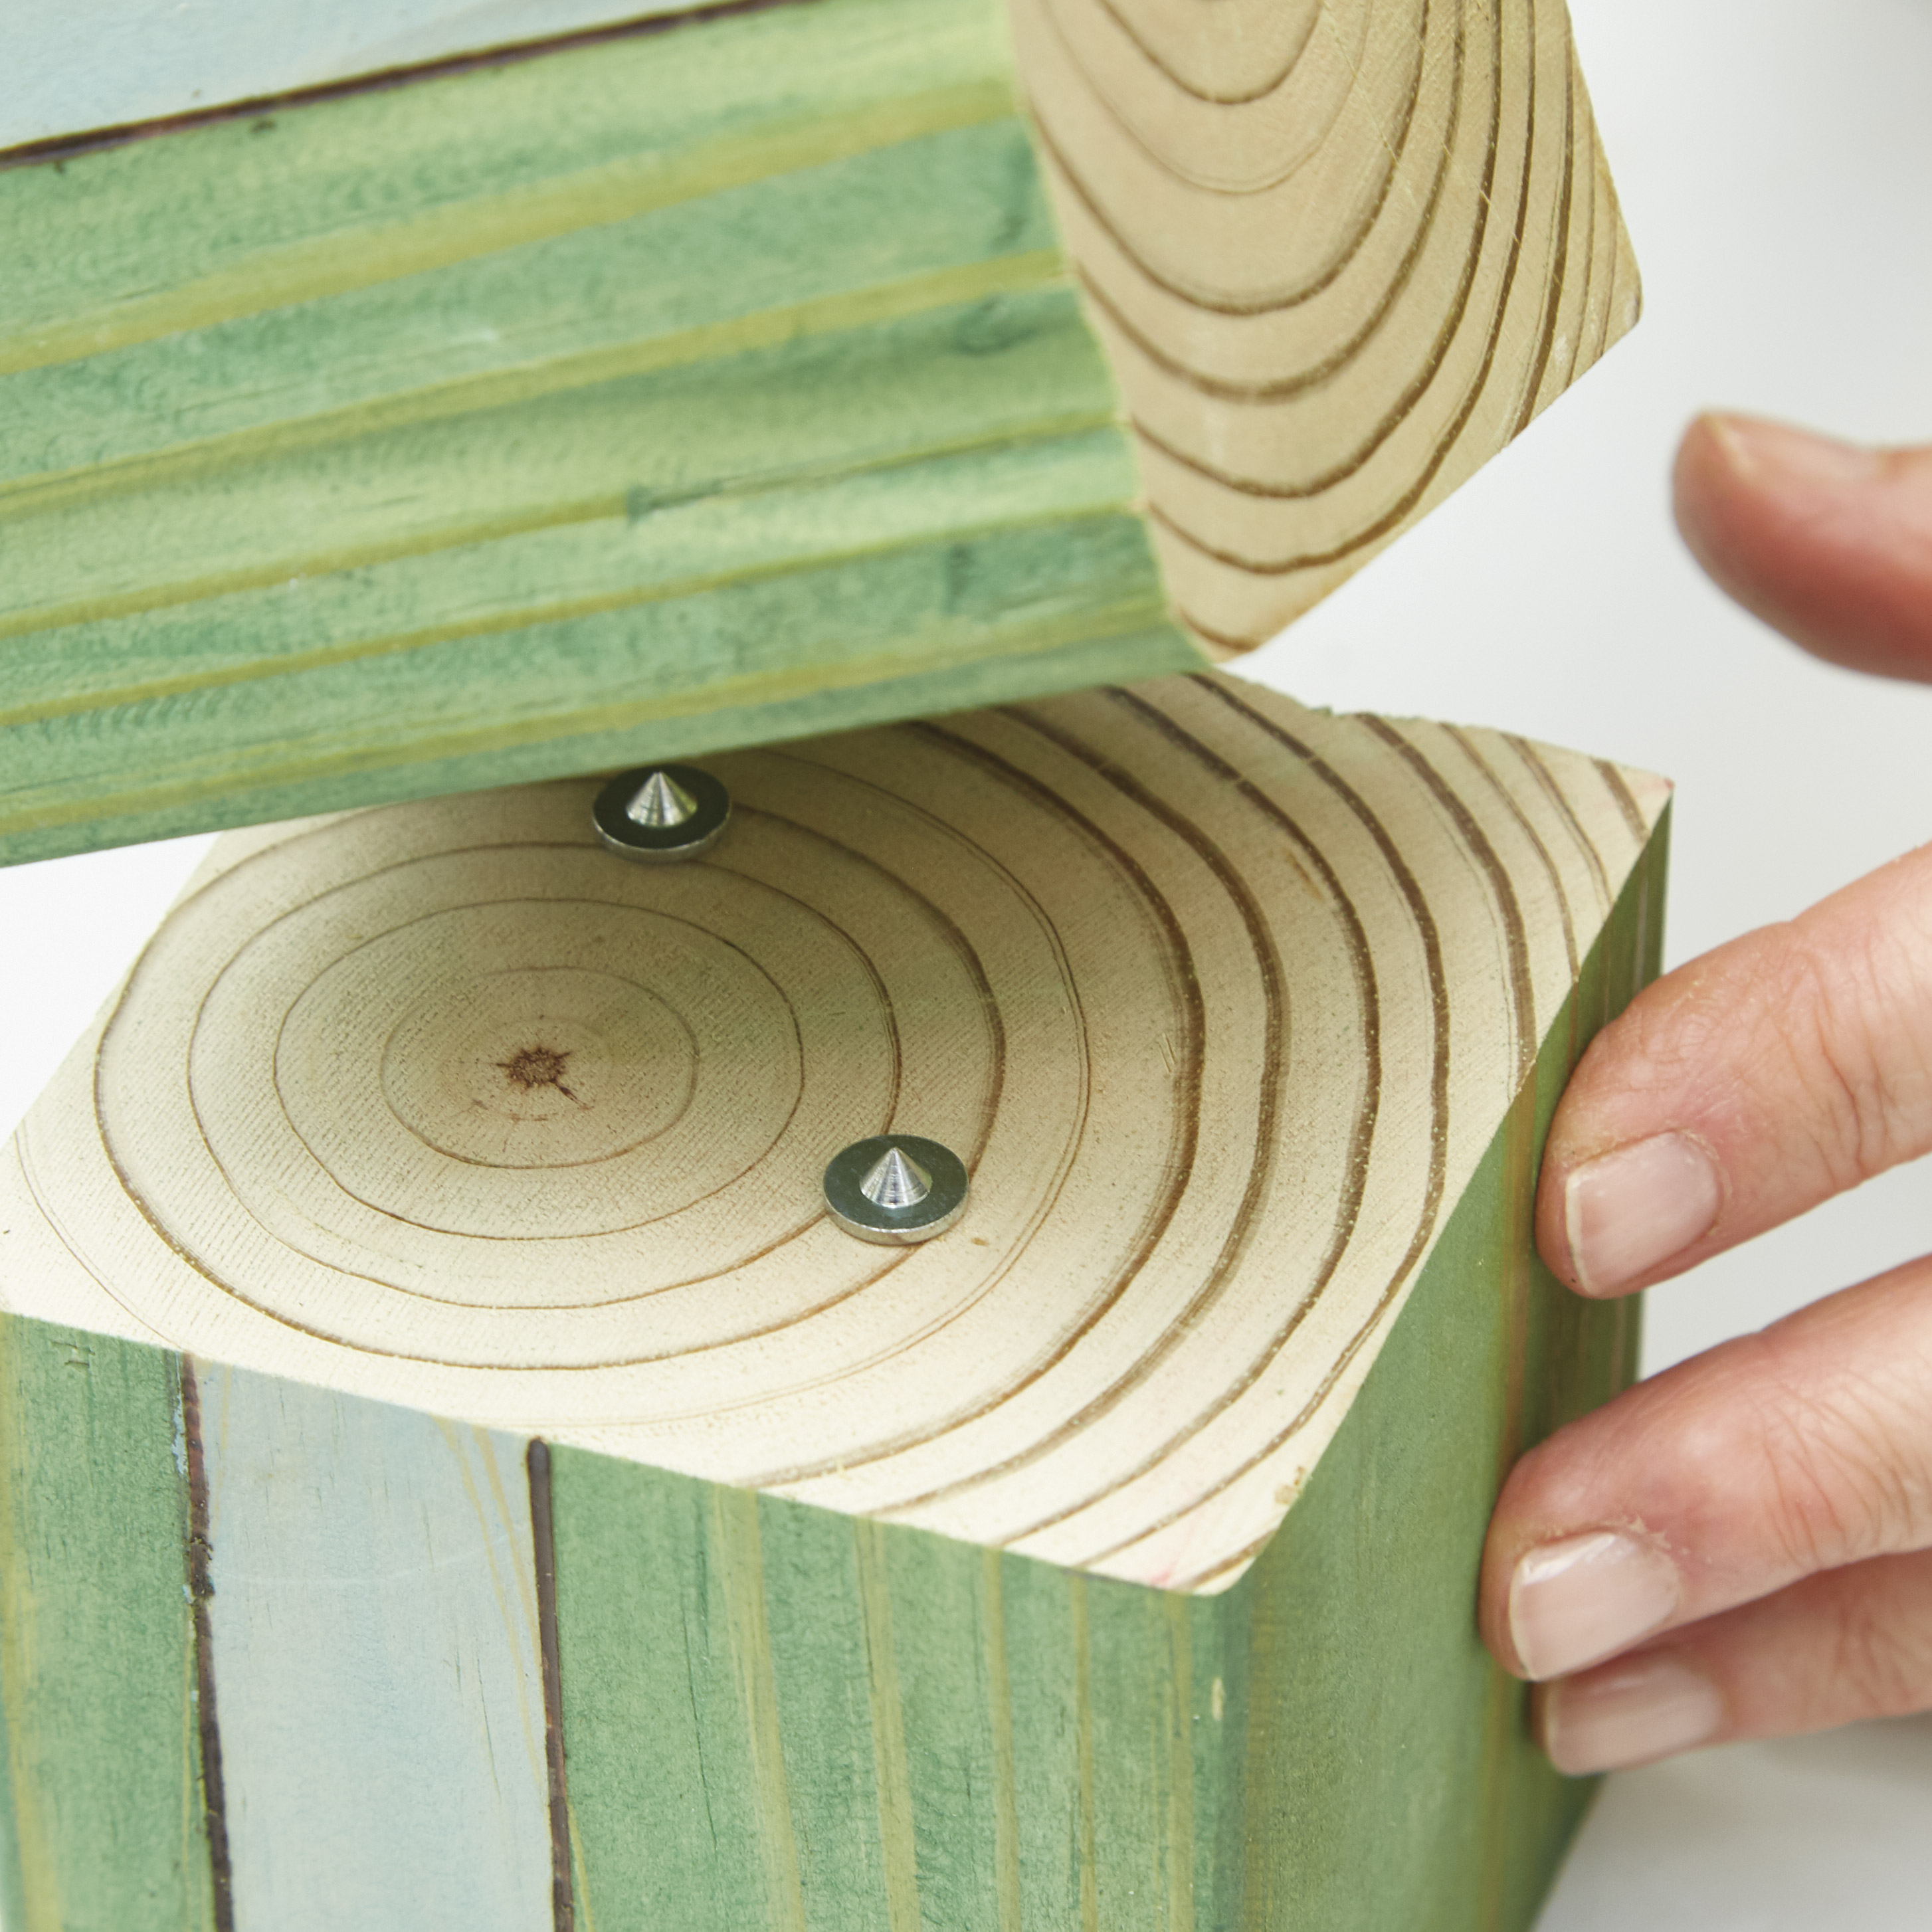 diy-garden-poles-dowel-pins: A dowel center fits in the drilled hole and has a sharp point to mark the block above. Line up and press the top block down onto the points.